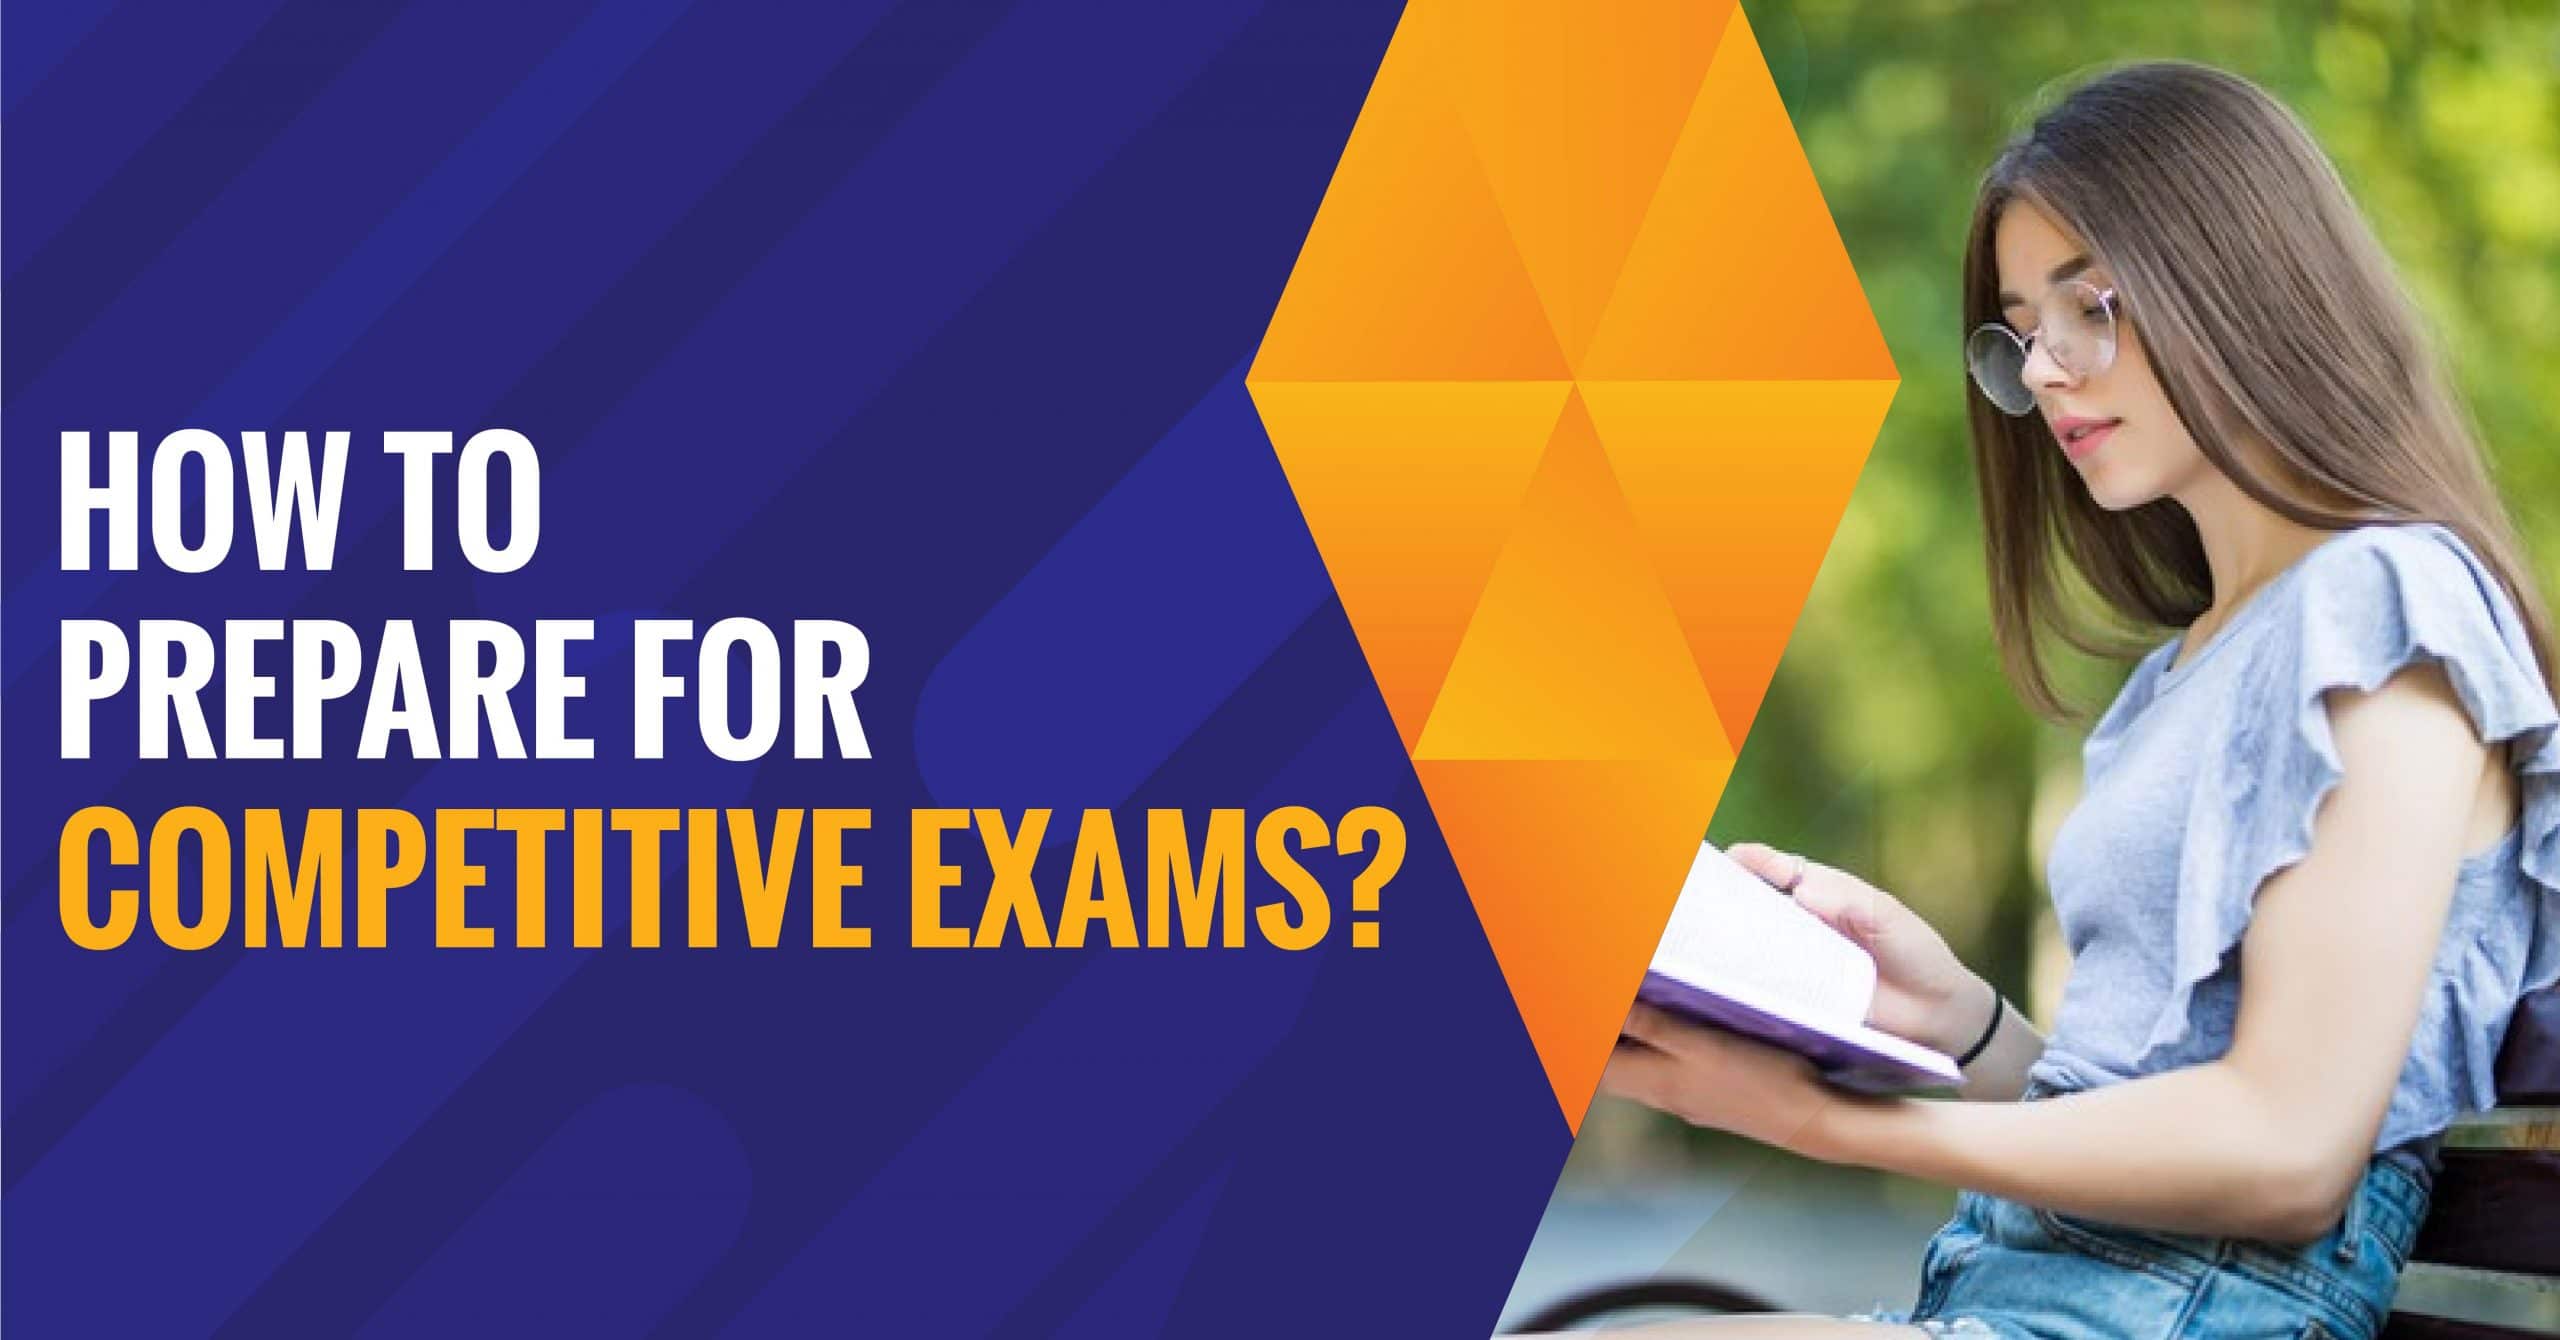 How To Prepare For Competitive Exams- 12 Exam Preparation Tips For 2021